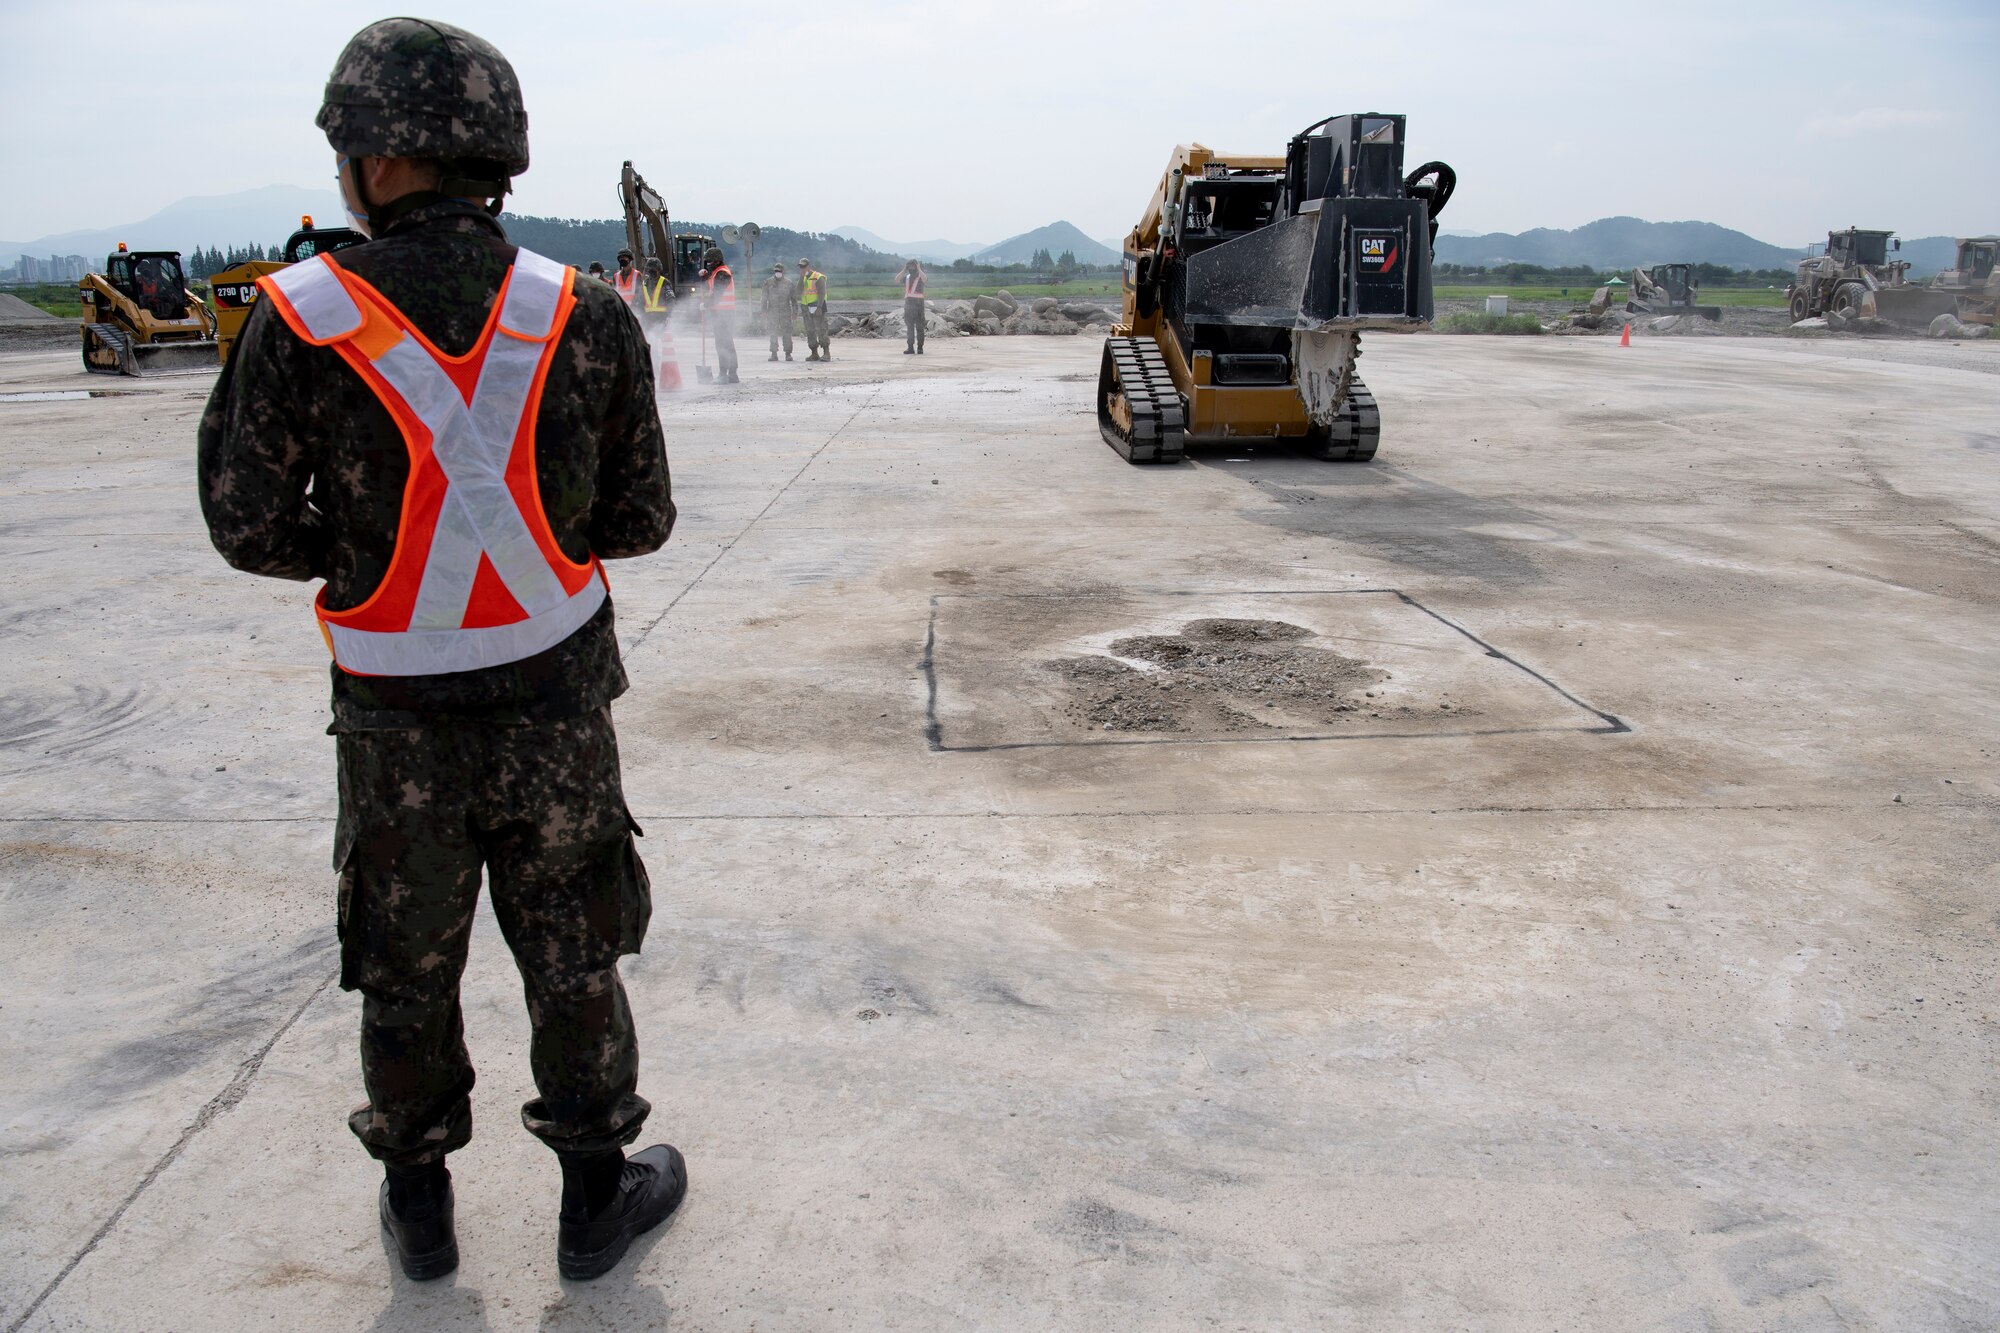 Civil Engineers from the Republic of Korea Air Force (ROKAF) and United States Air Force (USAF) use Compact Track Loaders with saw attachments to cut cement around craters during rapid airfield damage repair training, July 19, 2022 at Gwangju Air Base, Republic of Korea.